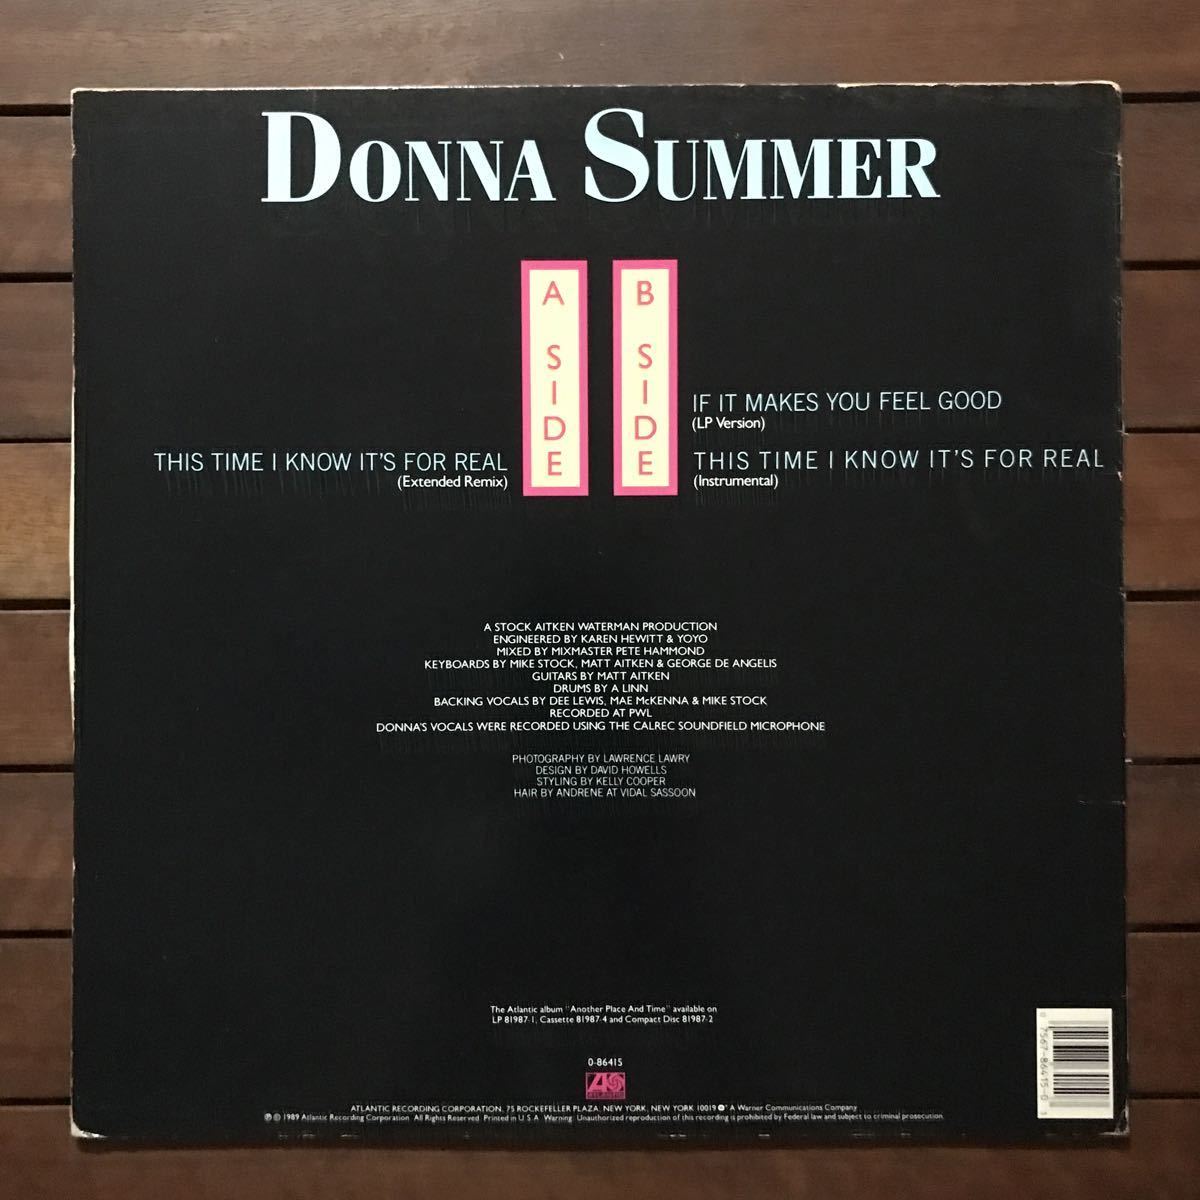 【r&b】Donna Summer / This Time I Know It's For Real［12inch］オリジナル盤《R40 9595》_画像2